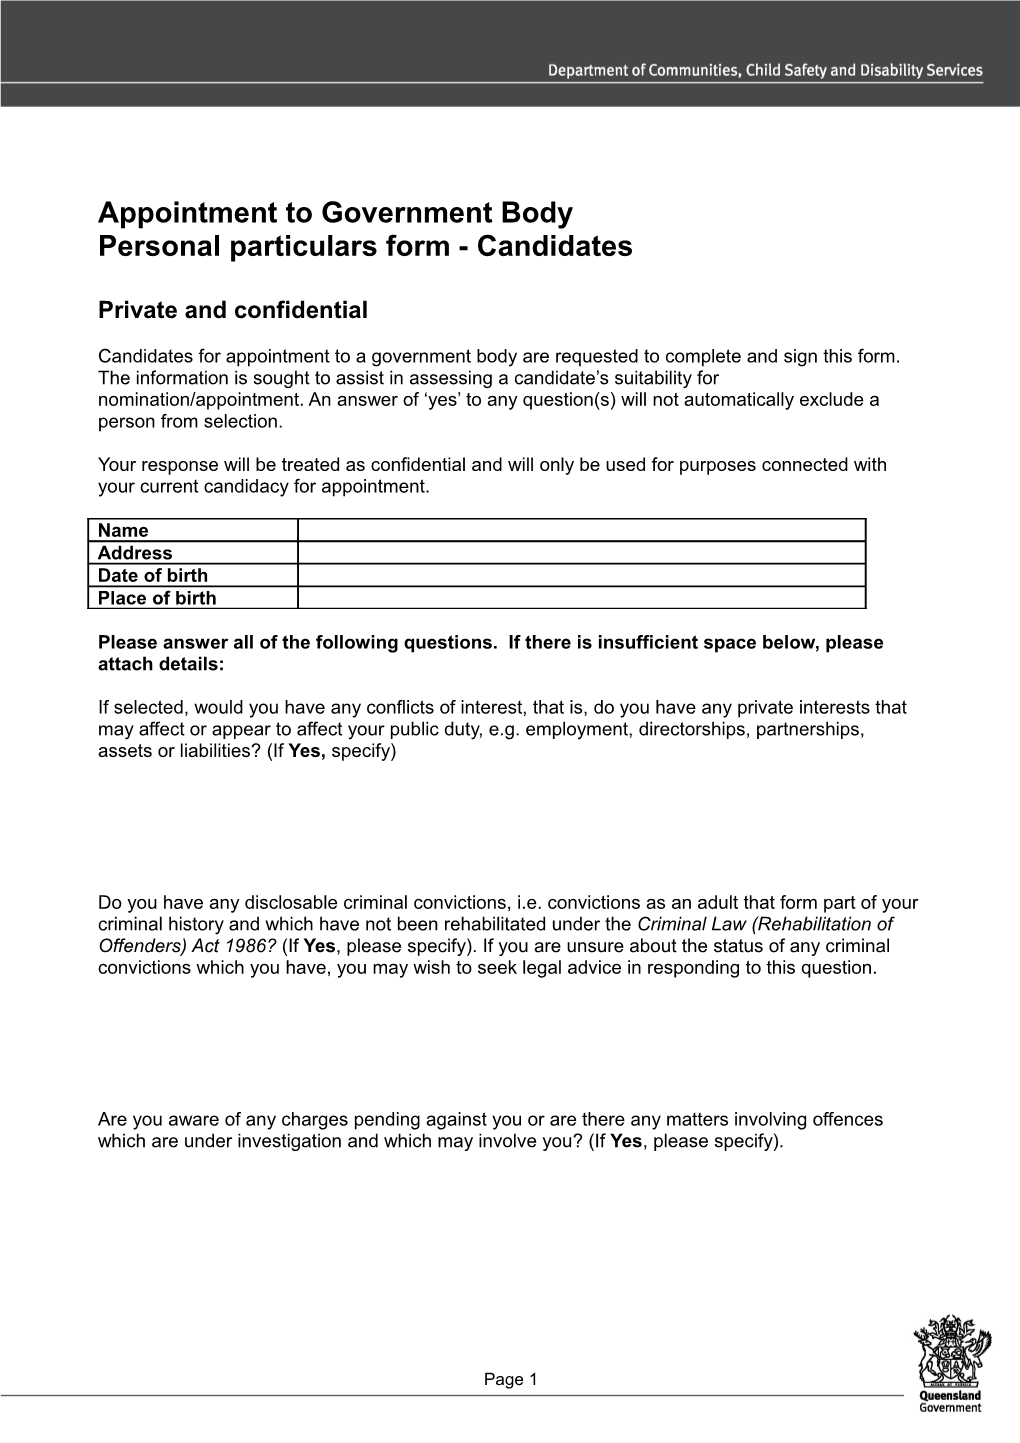 Appointment to Government Body - Personal Particulars Form - Candidates